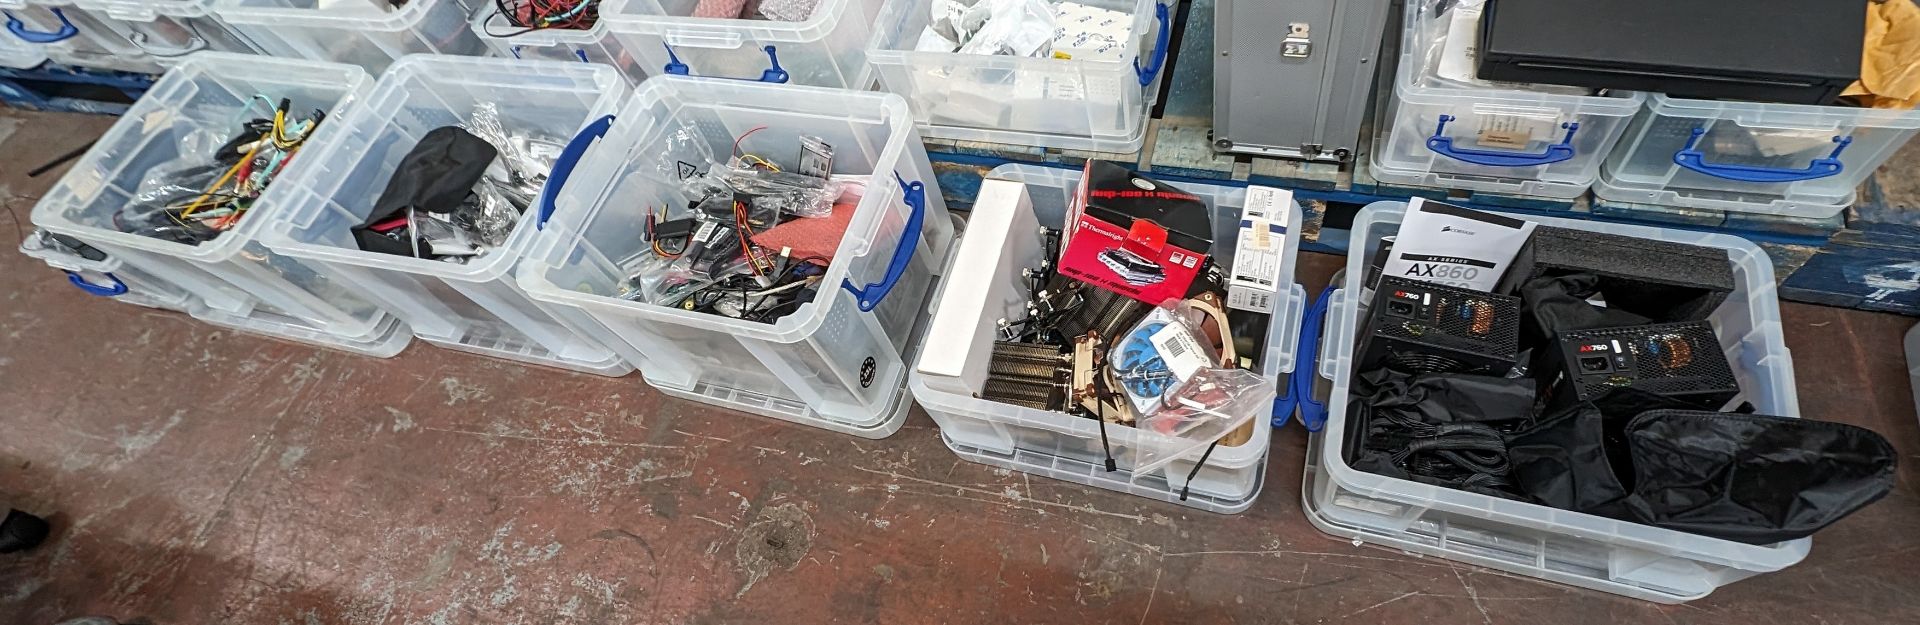 The contents of 6 crates of assorted computer components and miscellaneous